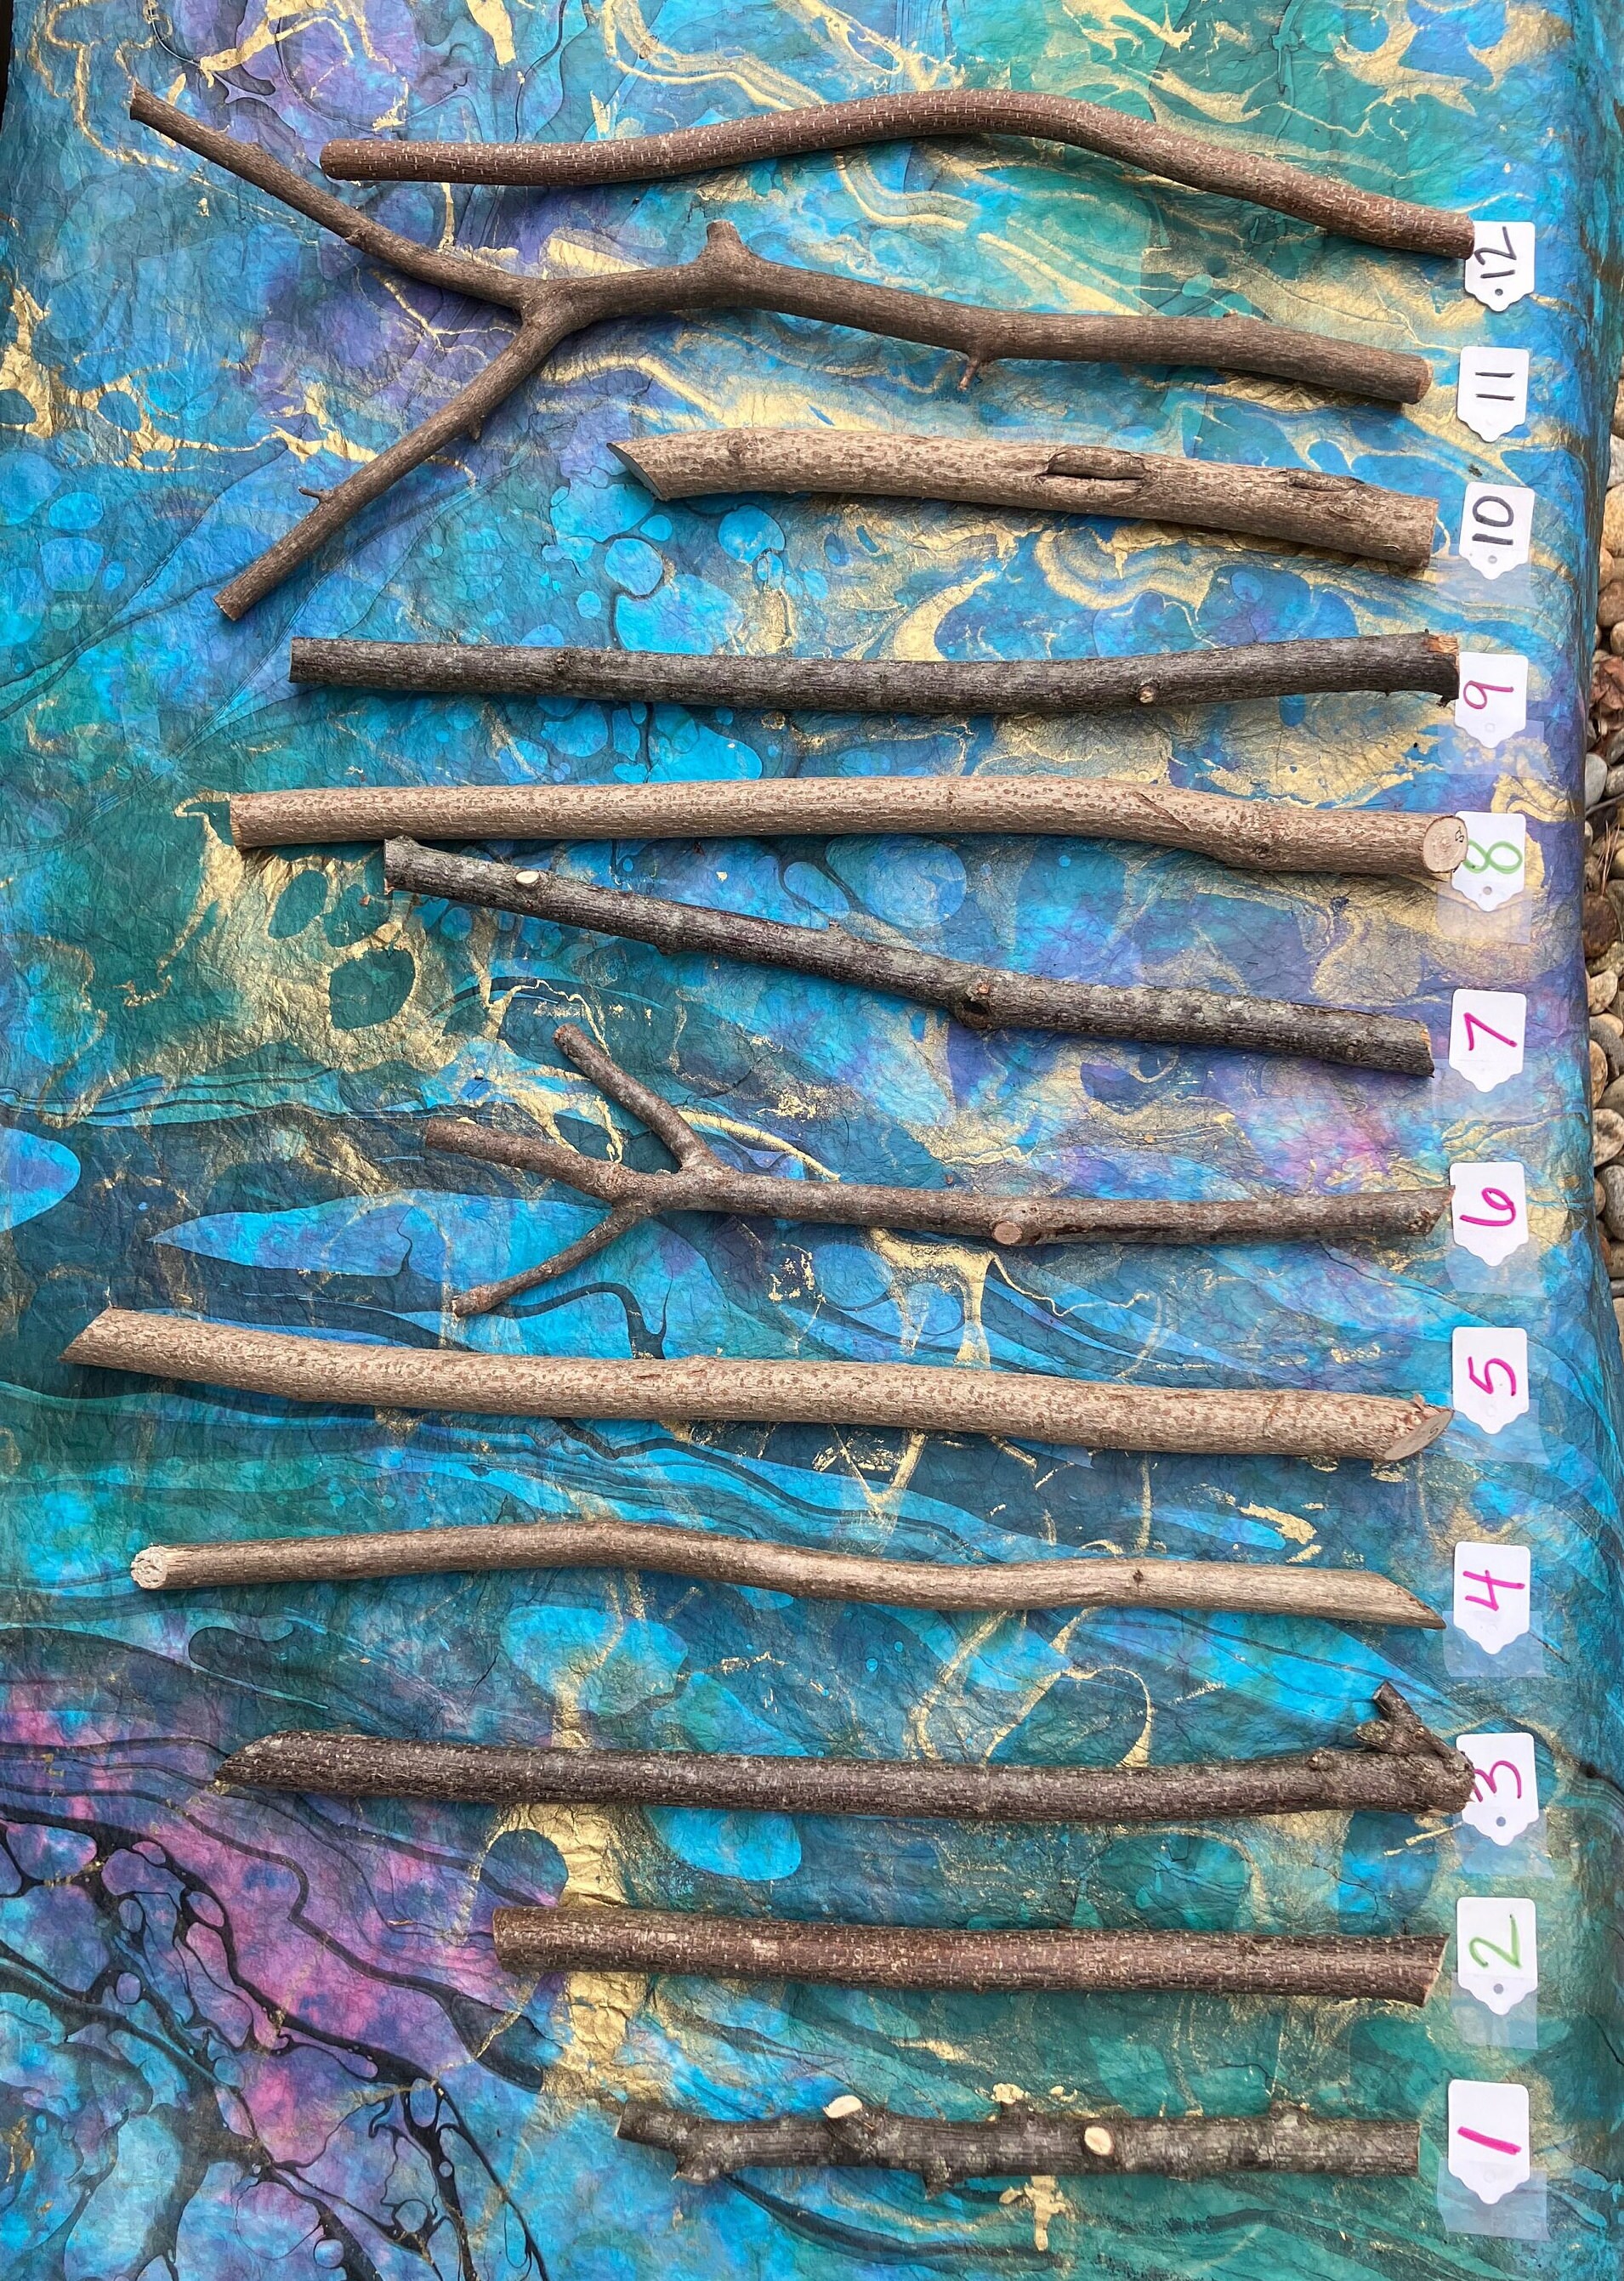 Thick Wood Sticks 12 In, Wooden Branches 6 Ct, Maple Wooden Sticks,  Bradford Sticks, Craft Branches, Rustic Sticks, Wood Sticks for Wands 